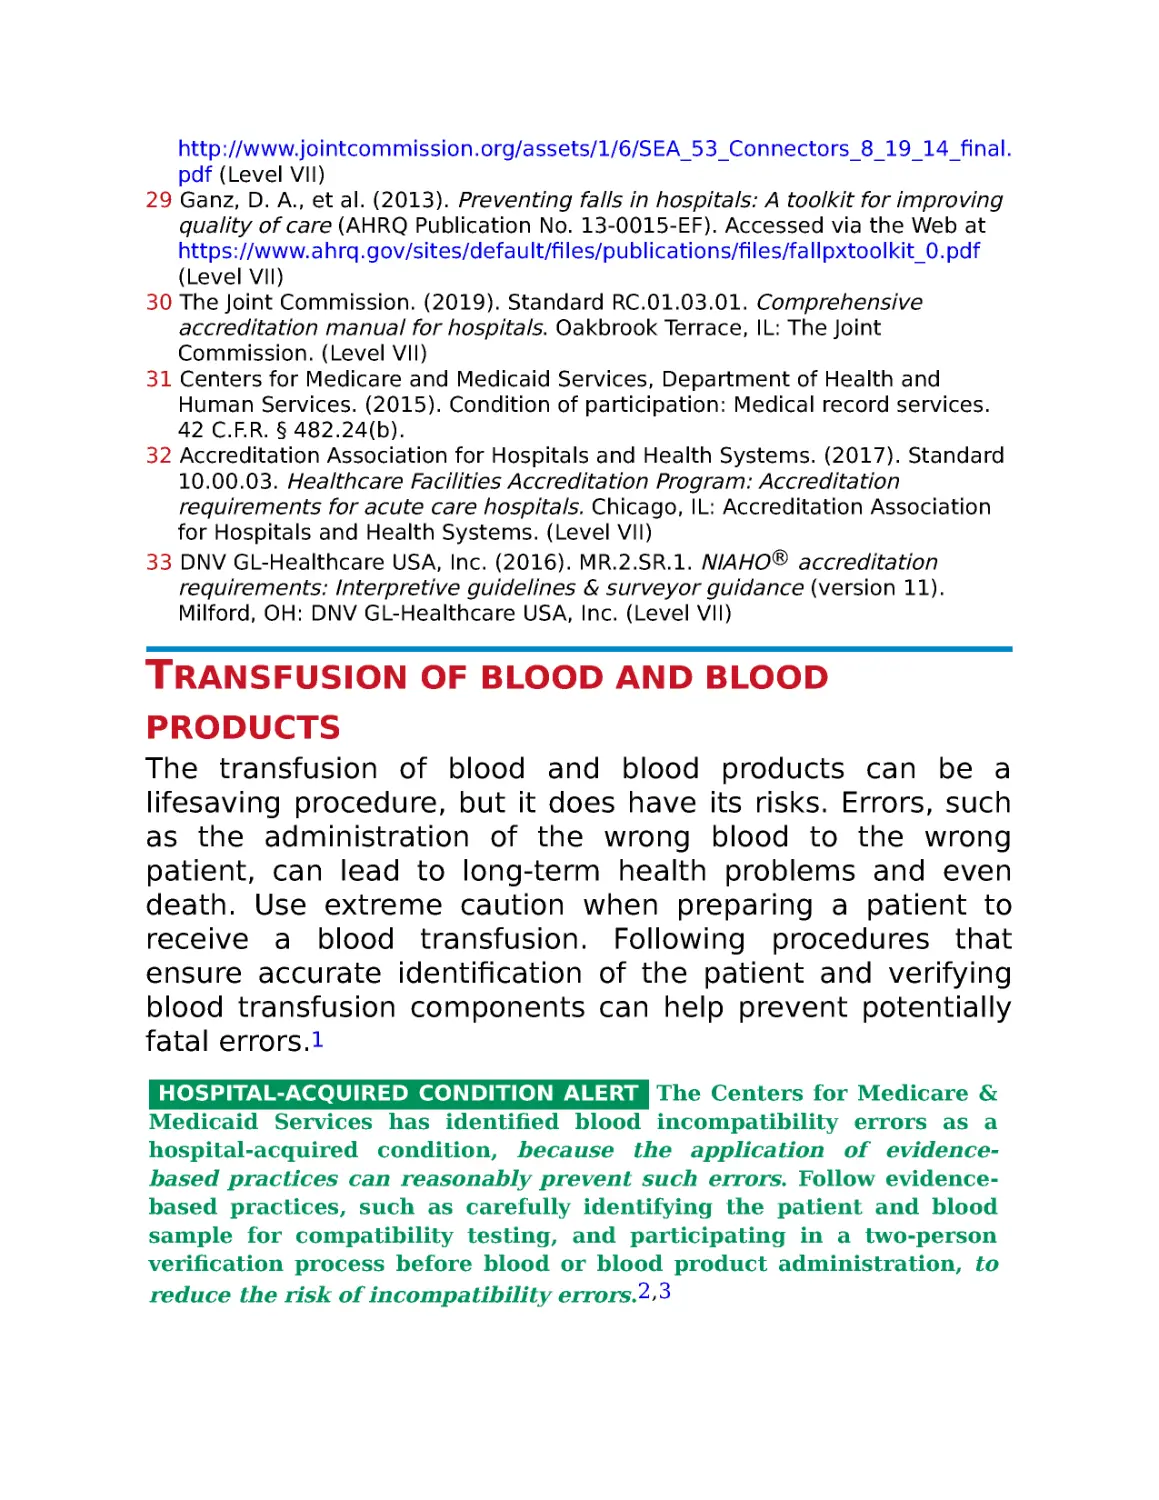 Transfusion of blood and blood products